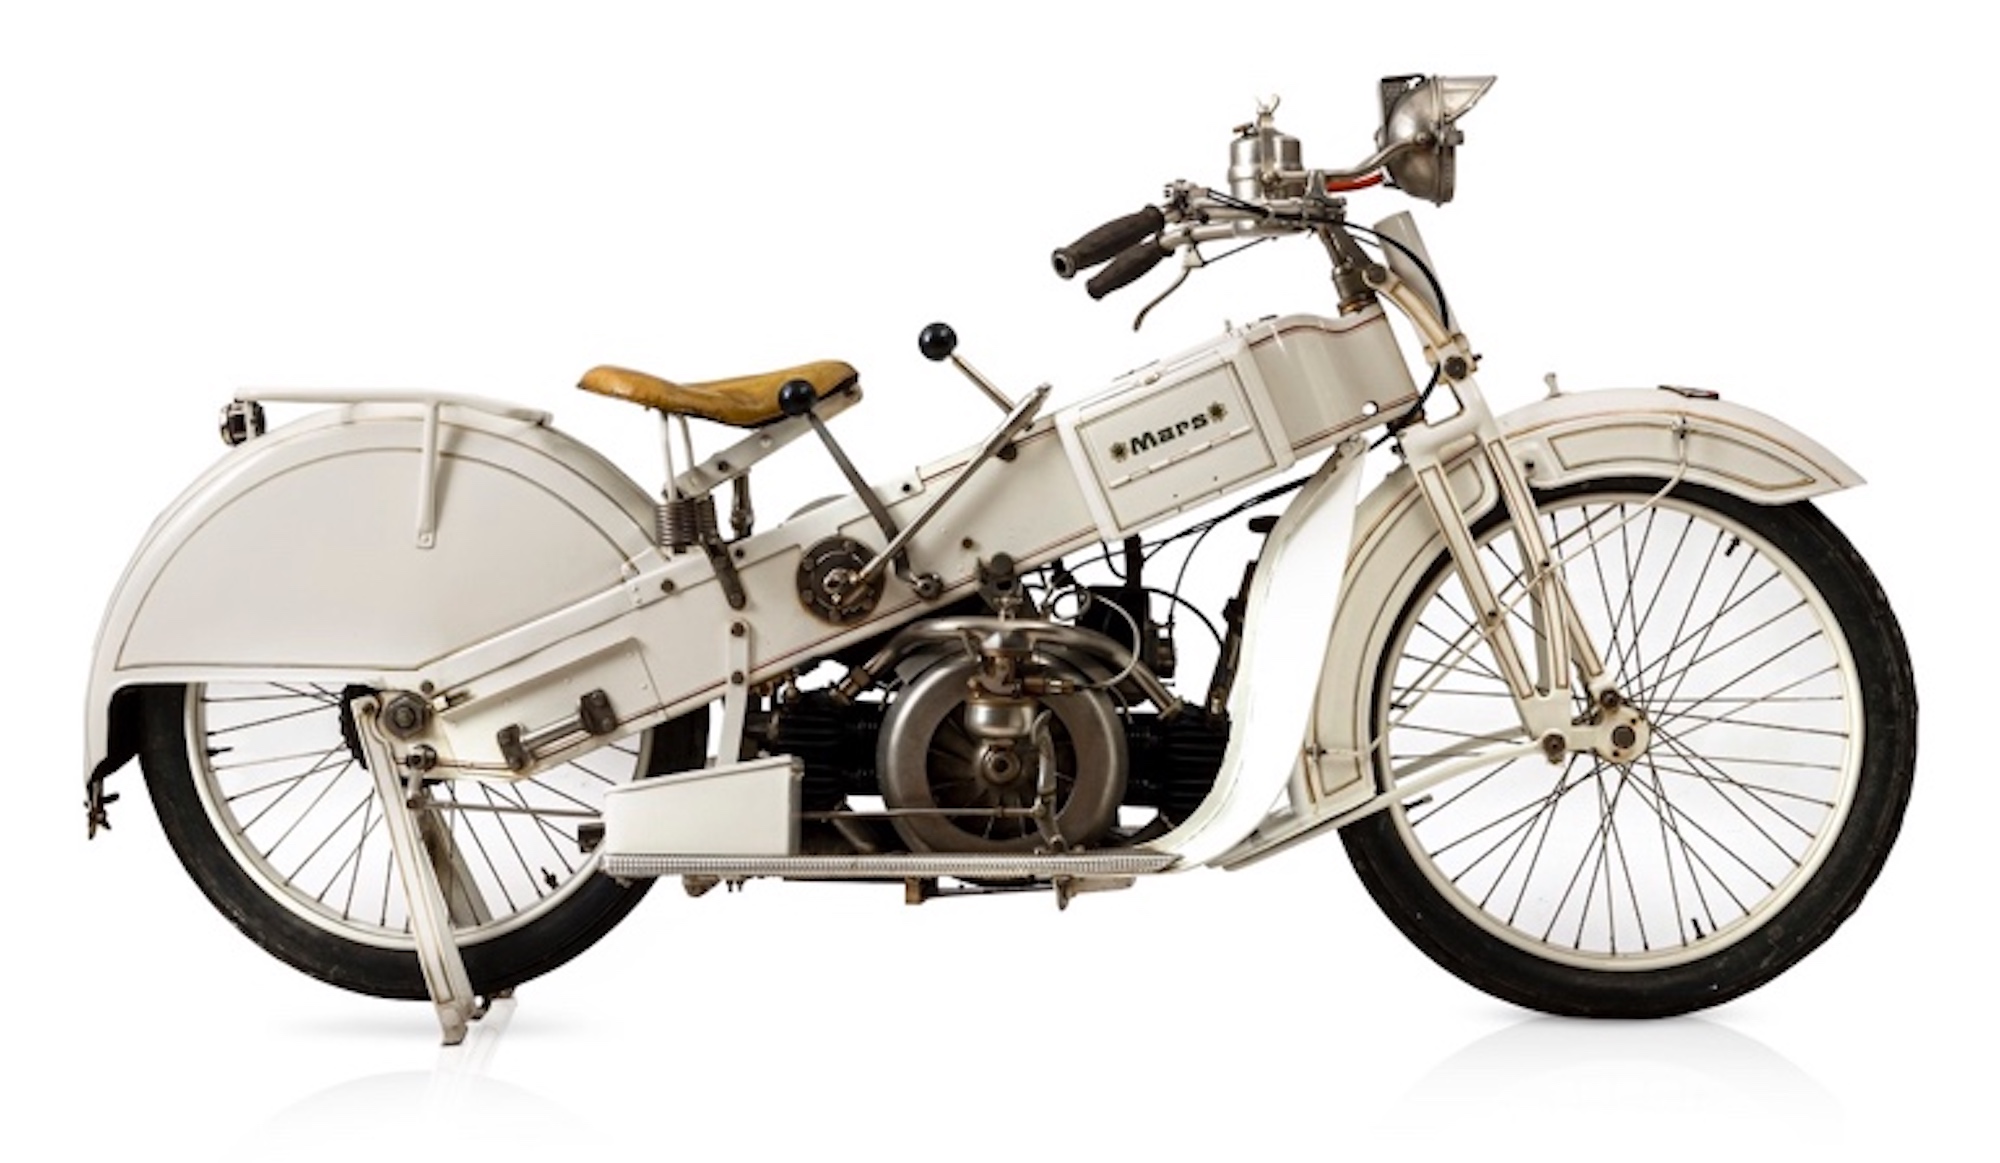 The stunningly futuristic c.1925 MARS 'Weiße Mars, featuring a 986cc Maybach boxer twin, excellent condition ratings, and estimated to bring in around €90,000-110,000 at the Bonhams Grandes Marques à Paris Sale. Media sourced from Bonhams' recent press release.